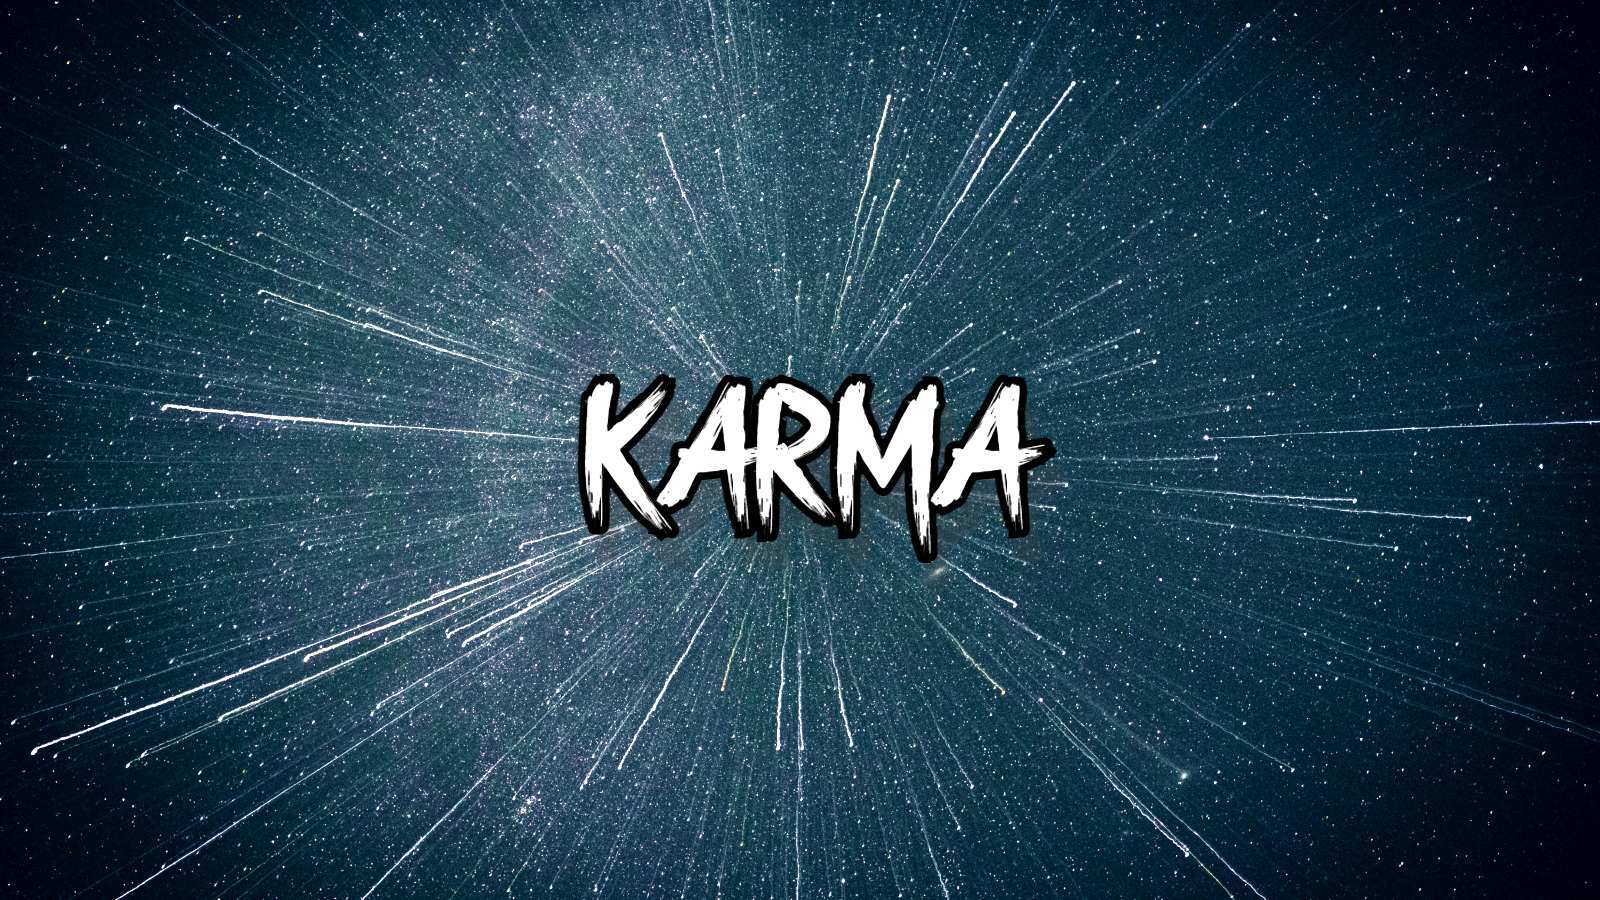 New Karma ransomware group likely a Nemty rebrand